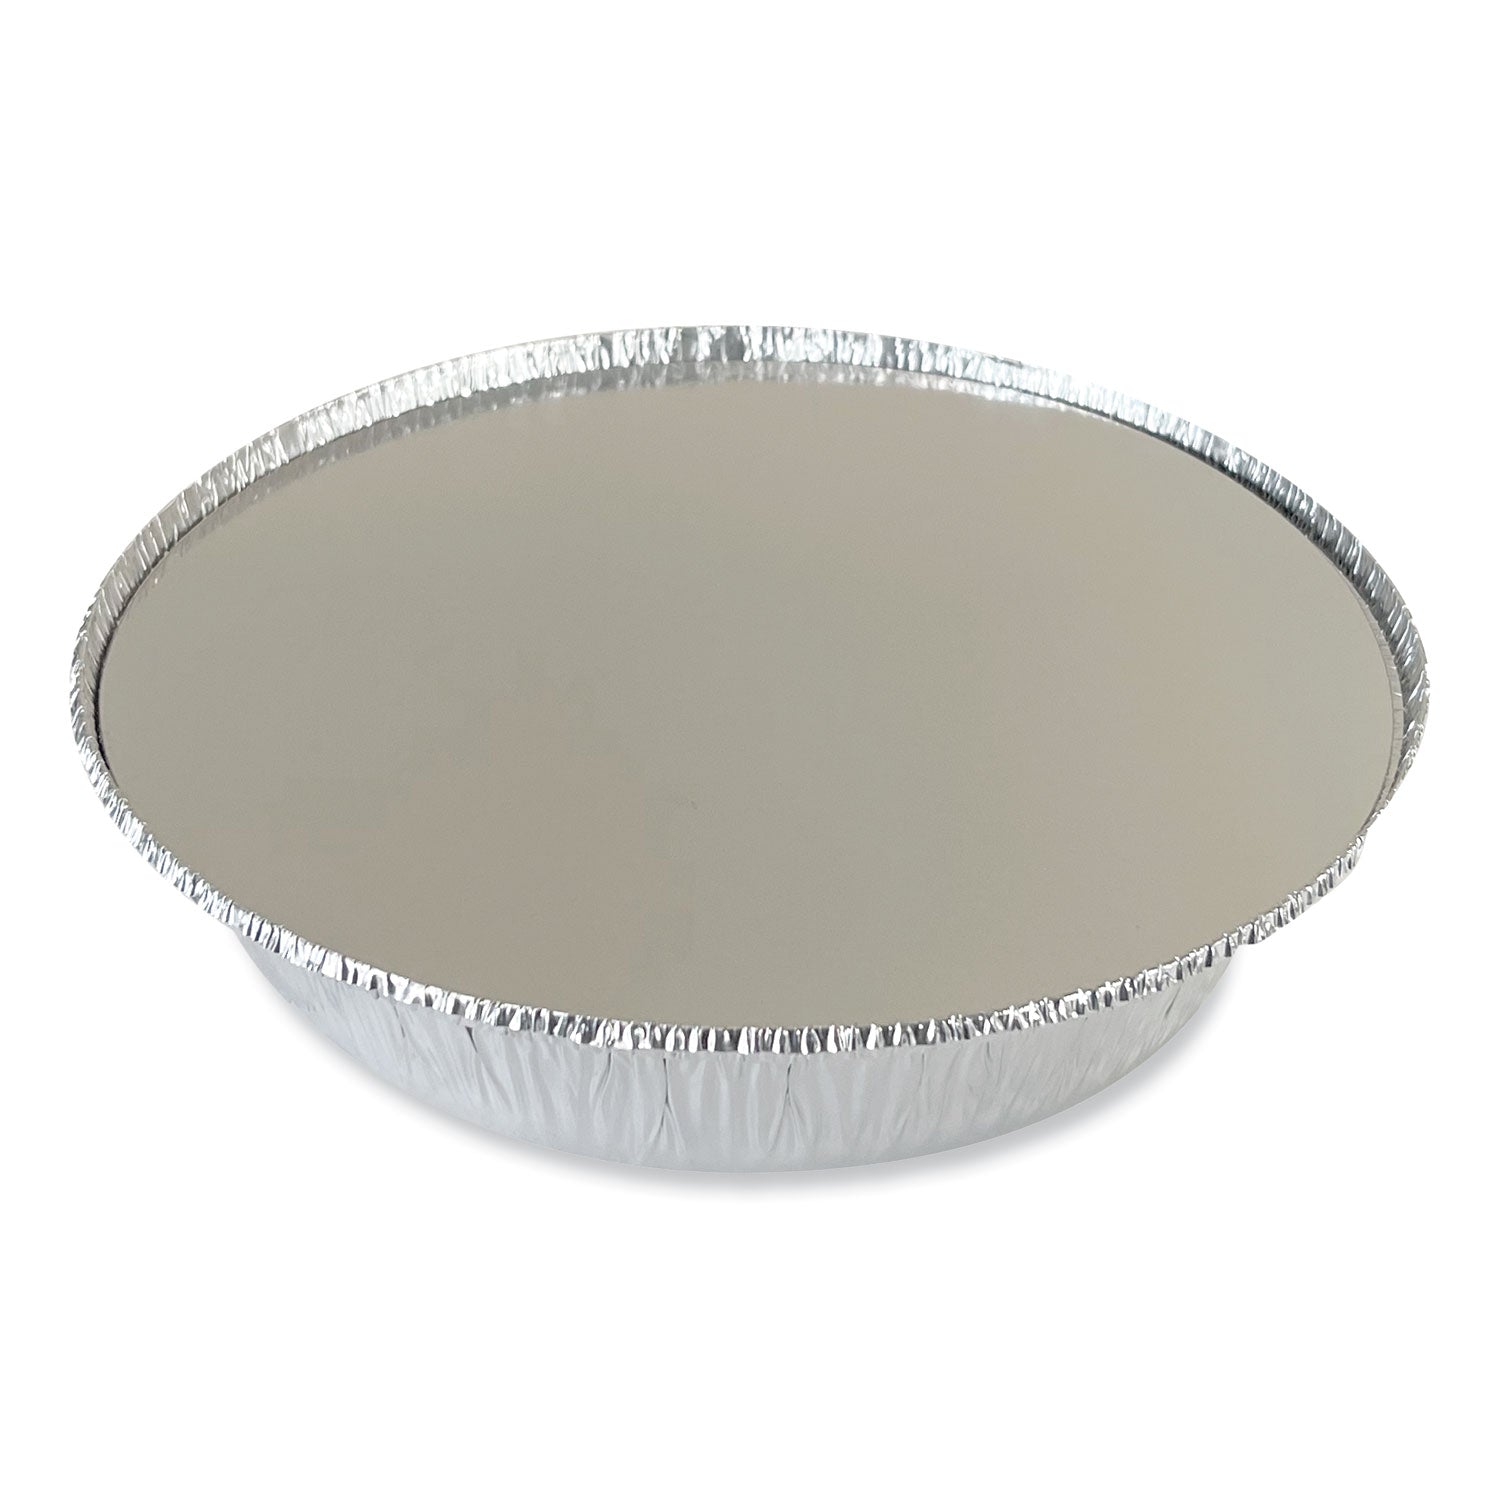 round-aluminum-to-go-container-lids-flat-lid-9-silver-paper-500-carton_bwkround9flid - 4